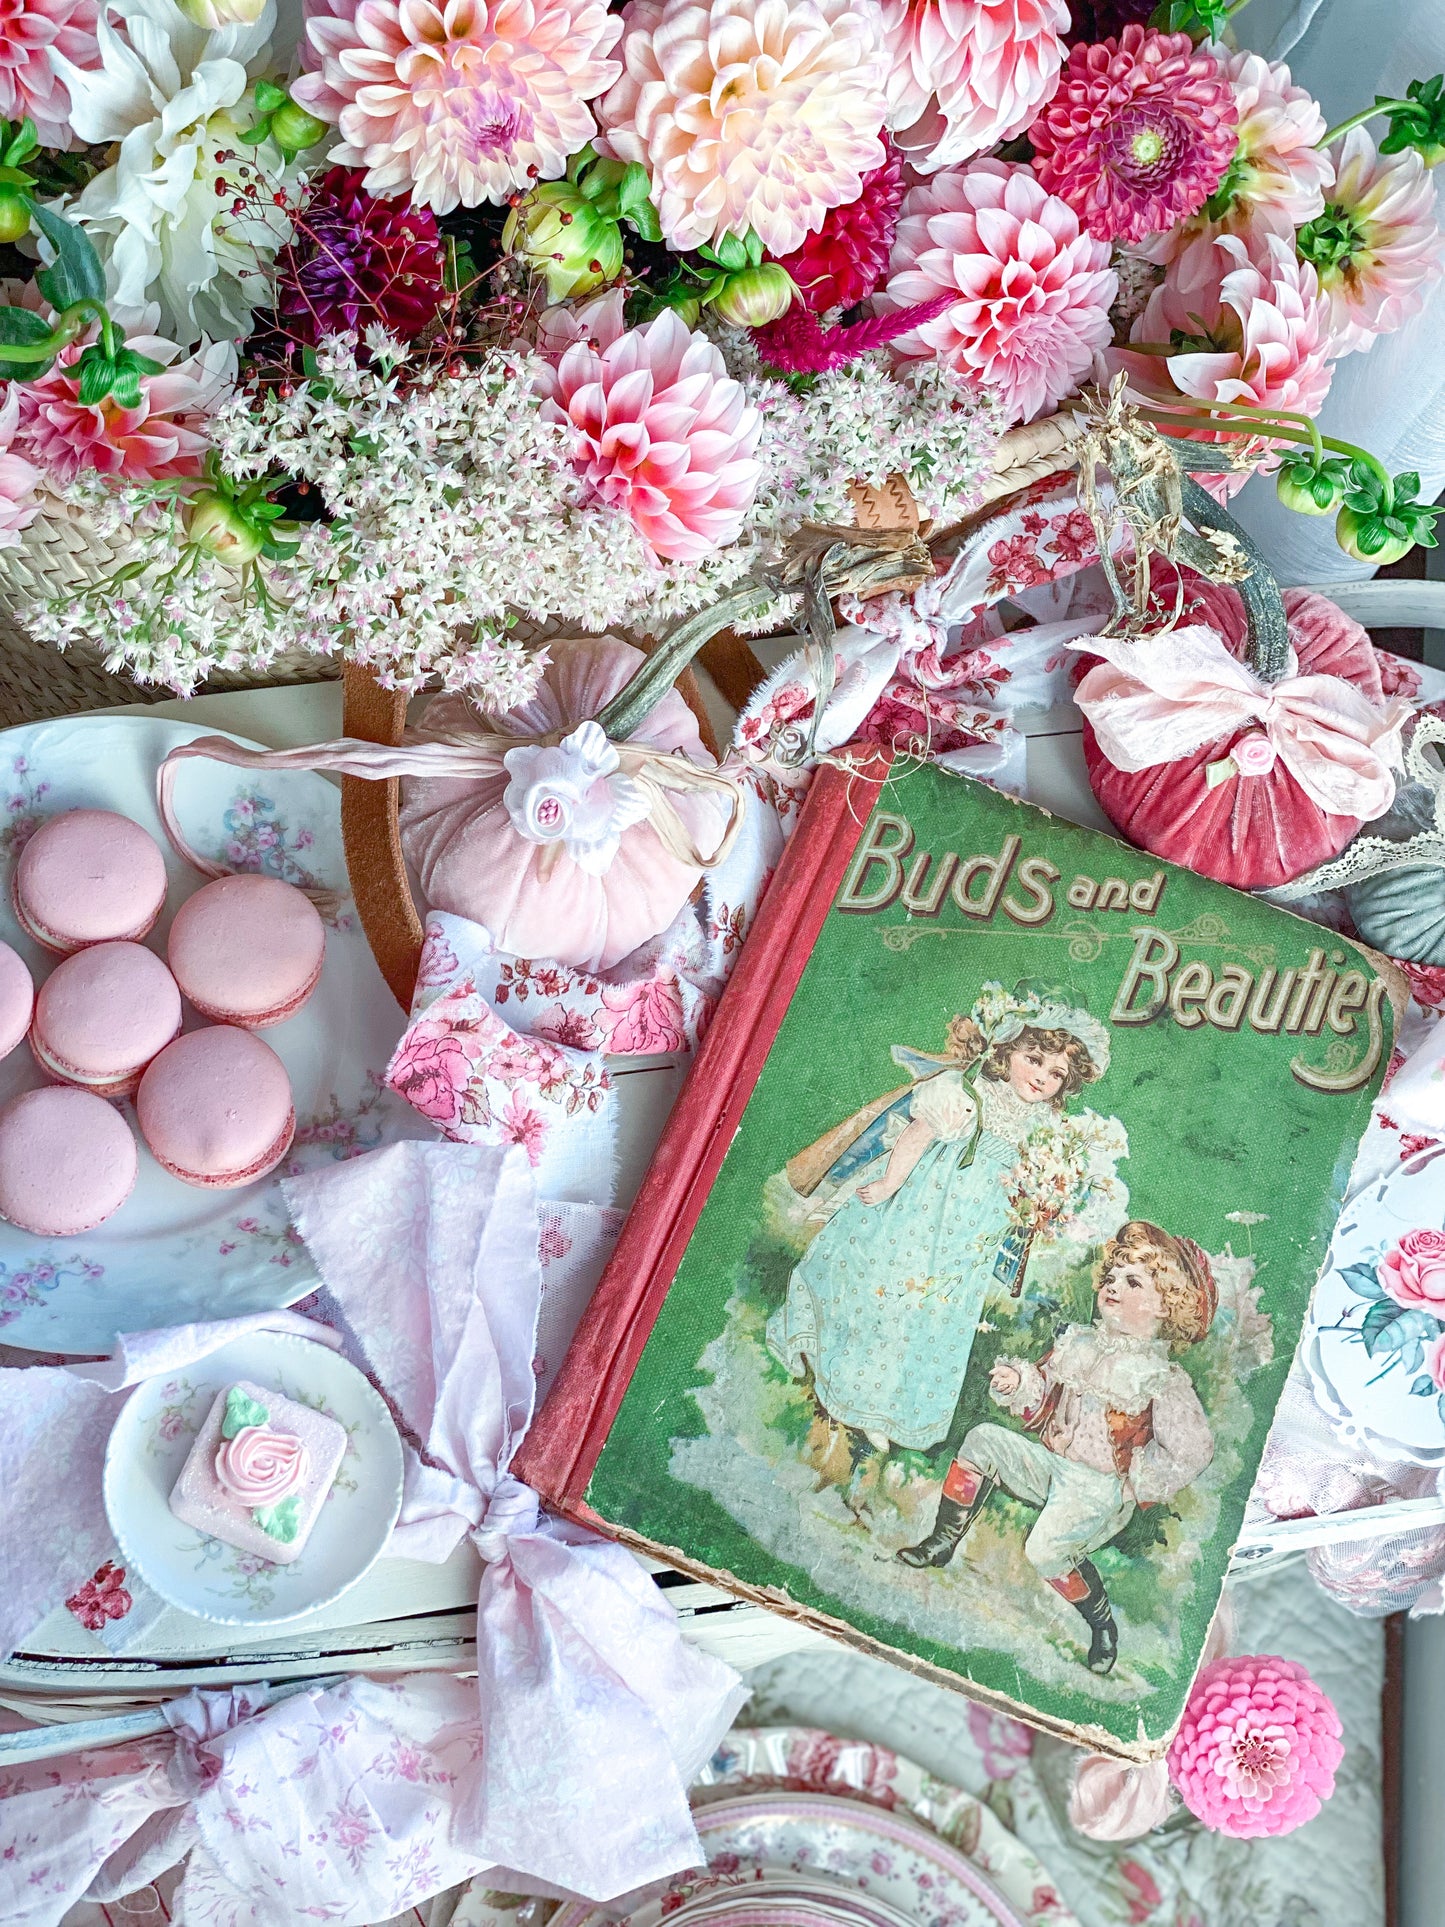 Buds and Beauties - Vintage Children’s Book